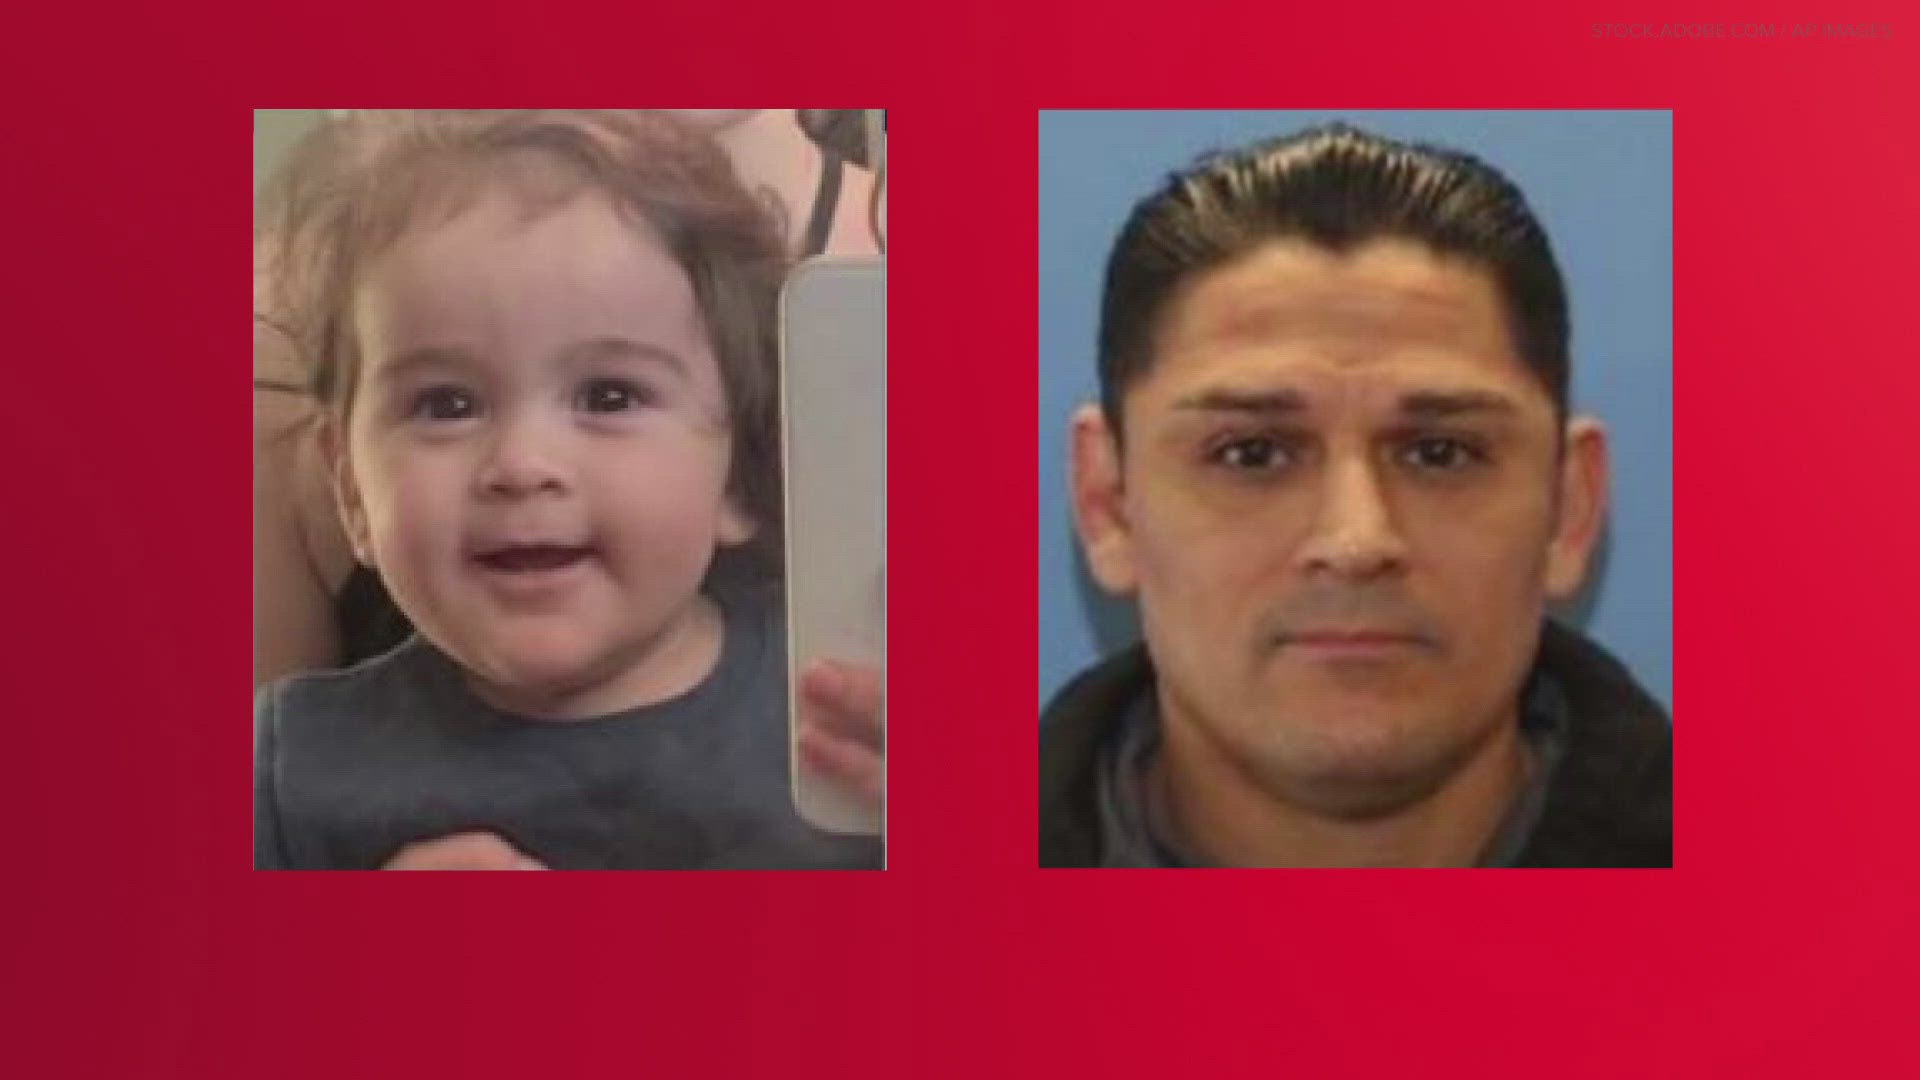 Elias Huizar is suspected of killing his ex-wife and girlfriend in Washington and abducting a 1-year-old, sparking a manhunt. The child is now being cared for.